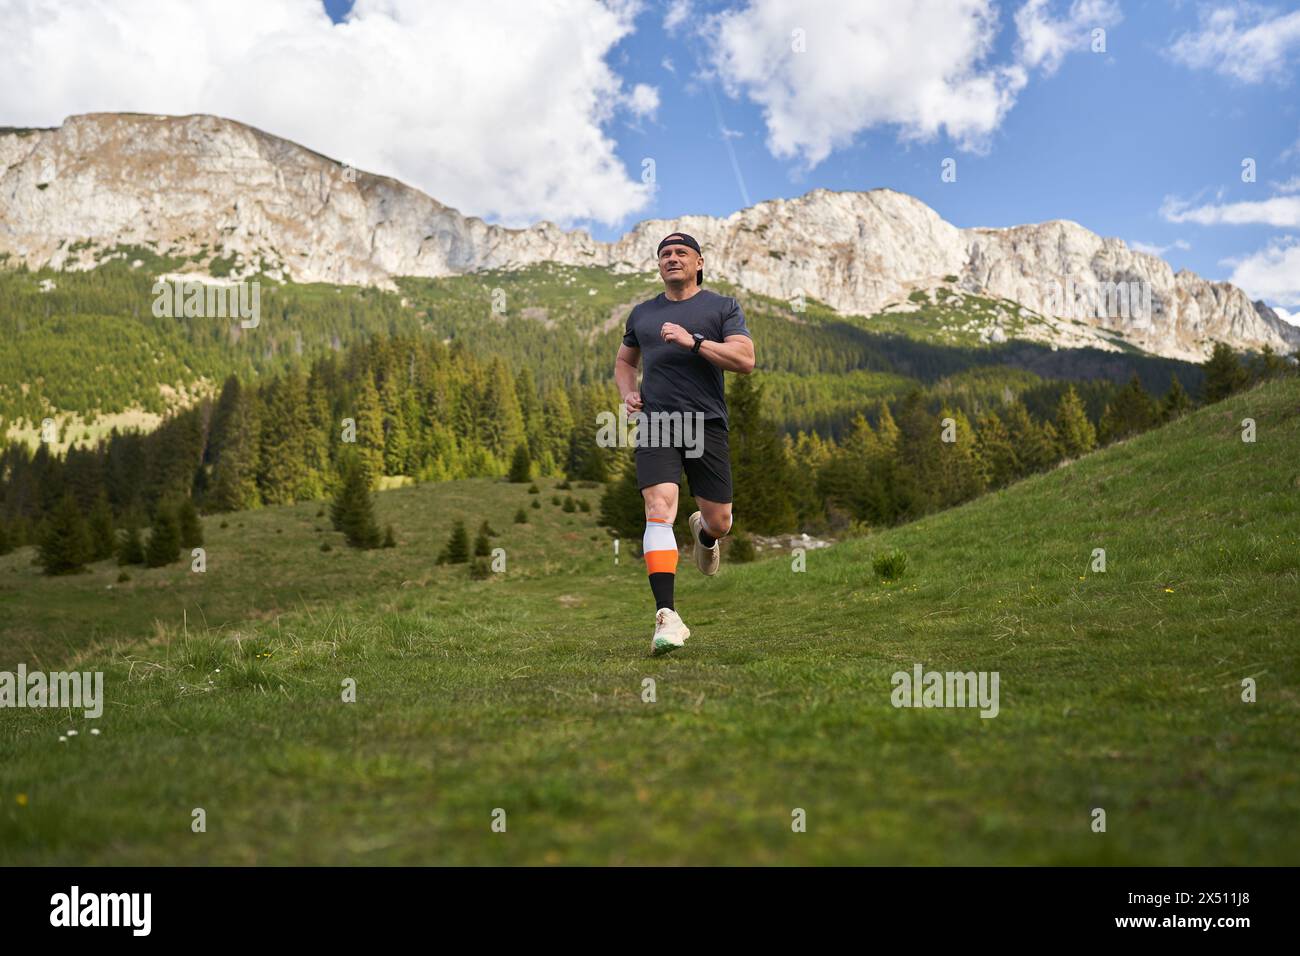 Mature man trail running at high elevation in the mountains, on the grass Stock Photo